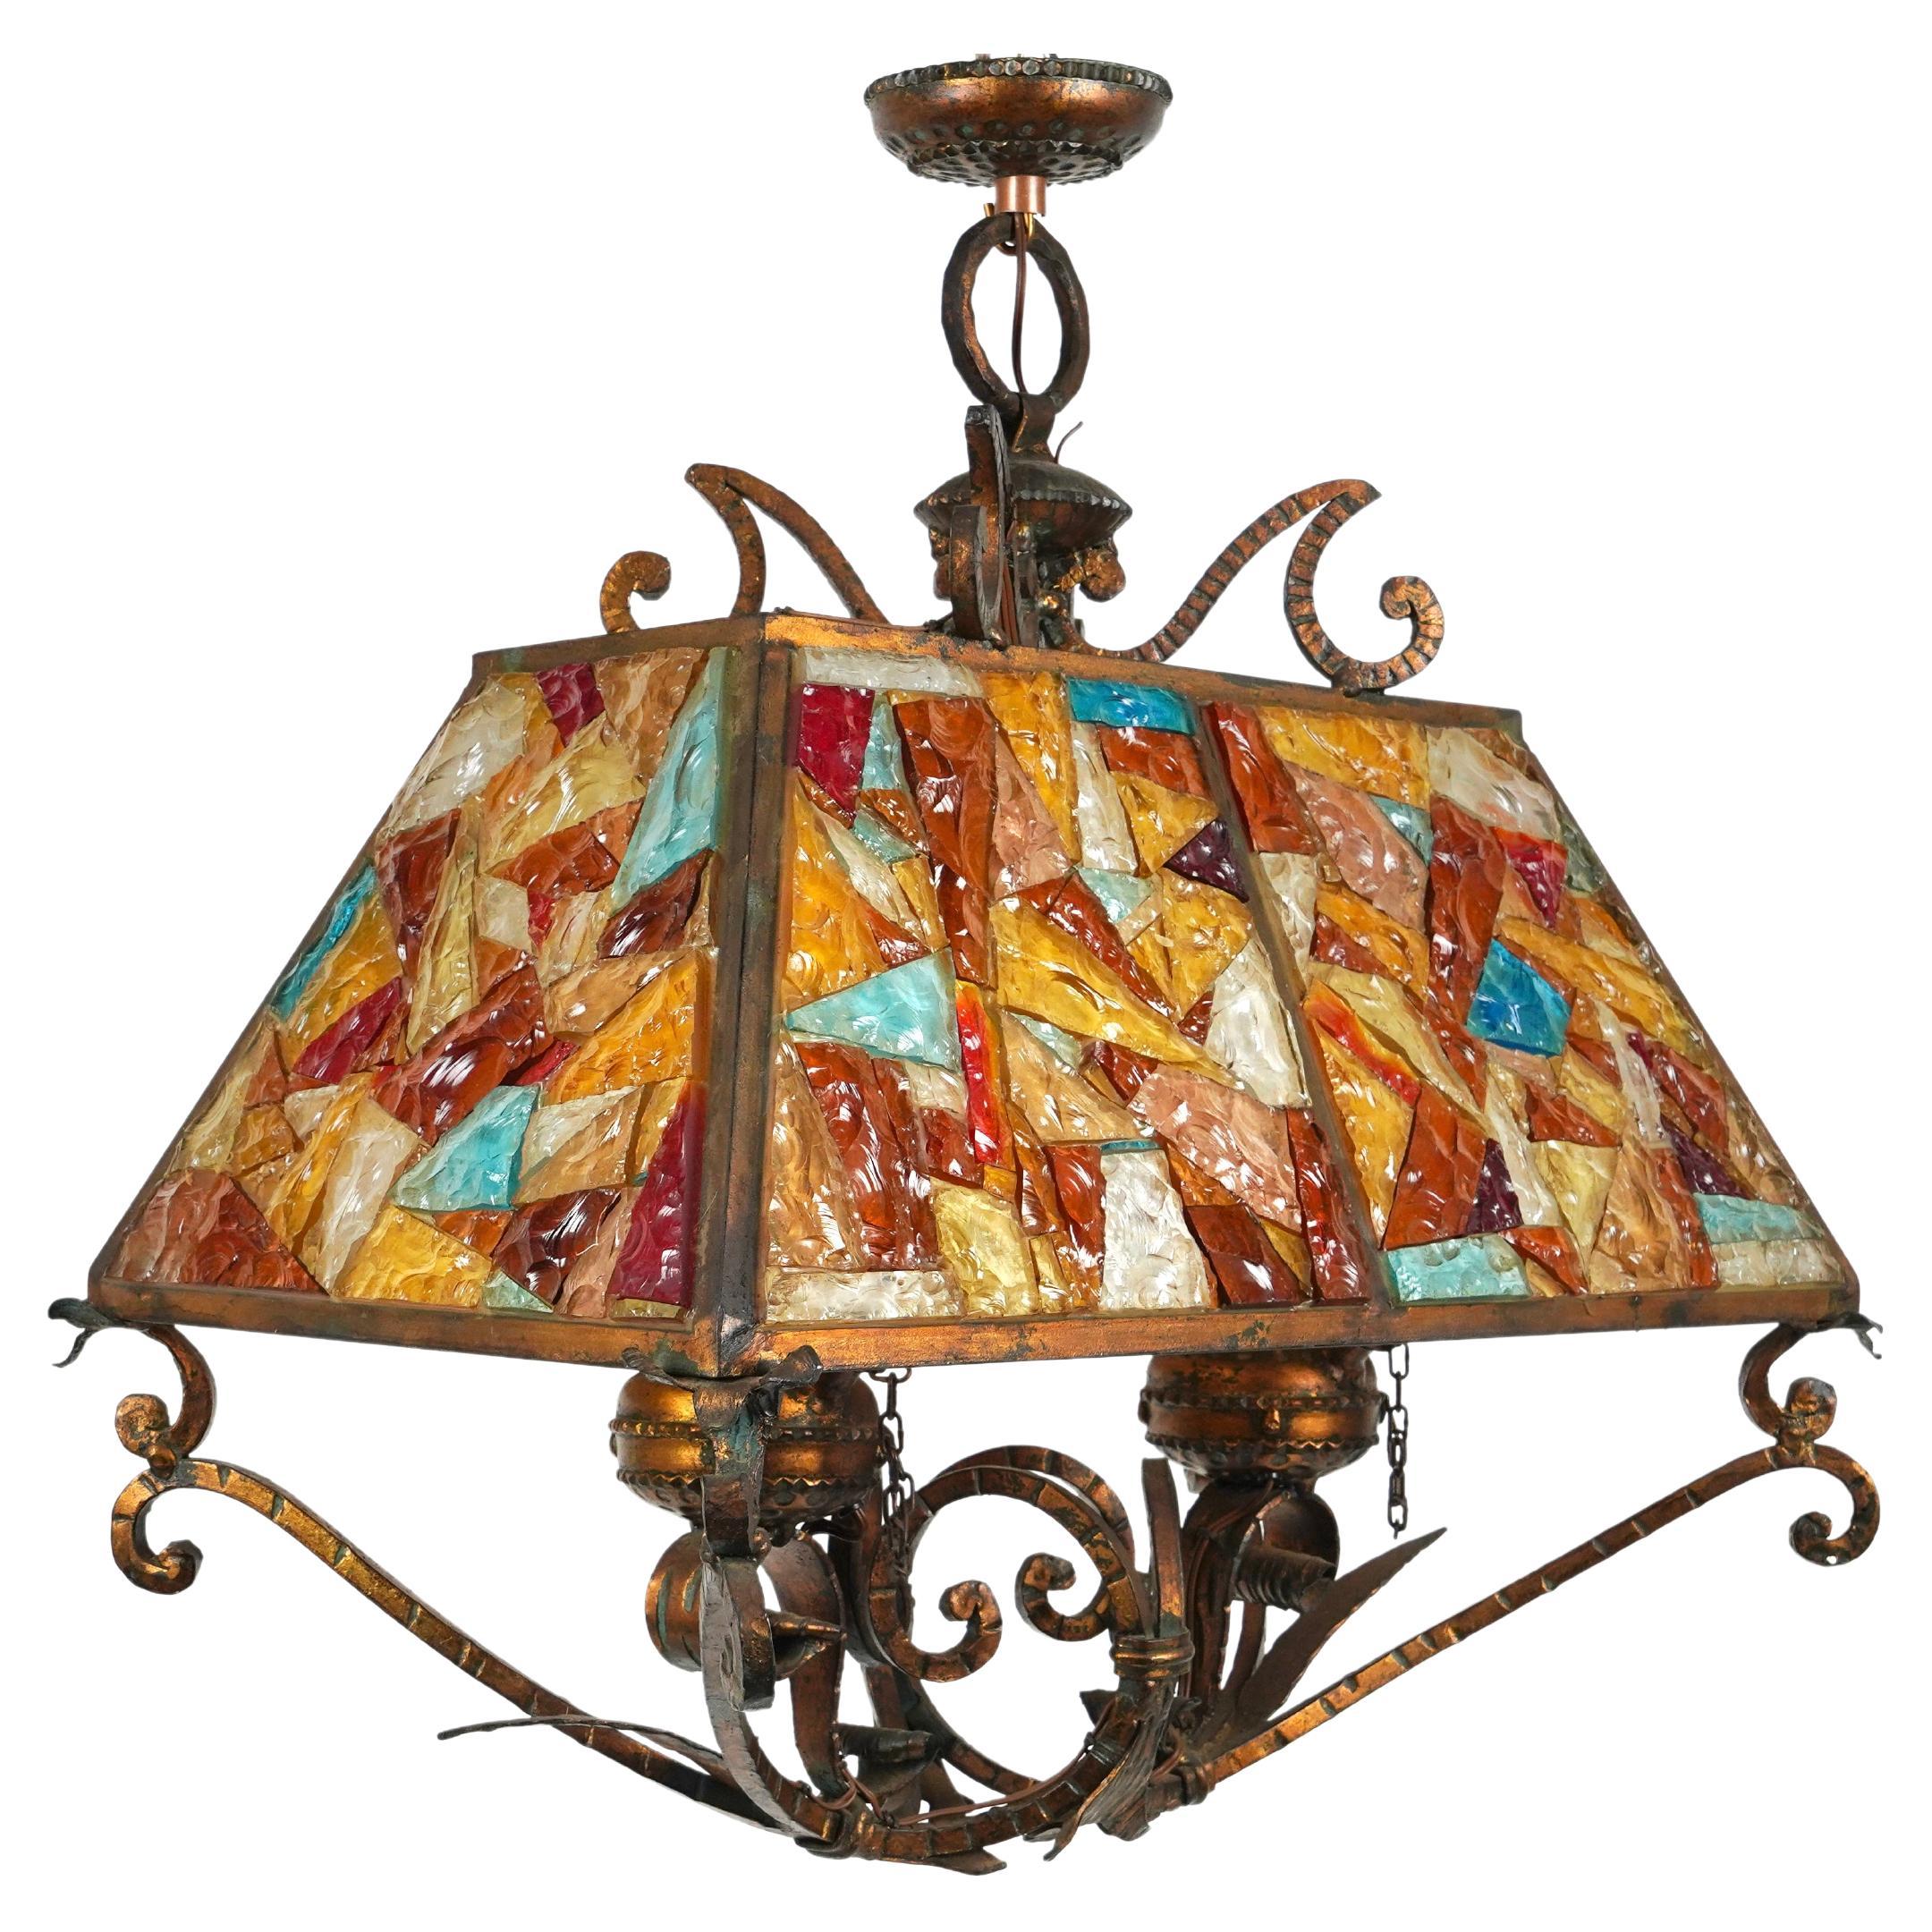 Amazing large Midcentury chandelier / lantern in colored bronze wrought iron and multi-color hammered glass produced by Longobard the concurrent of Poliarte at the 1960s / 1970s. 

Made in Italy in the 1970s. 

It uses 2 bulbs.